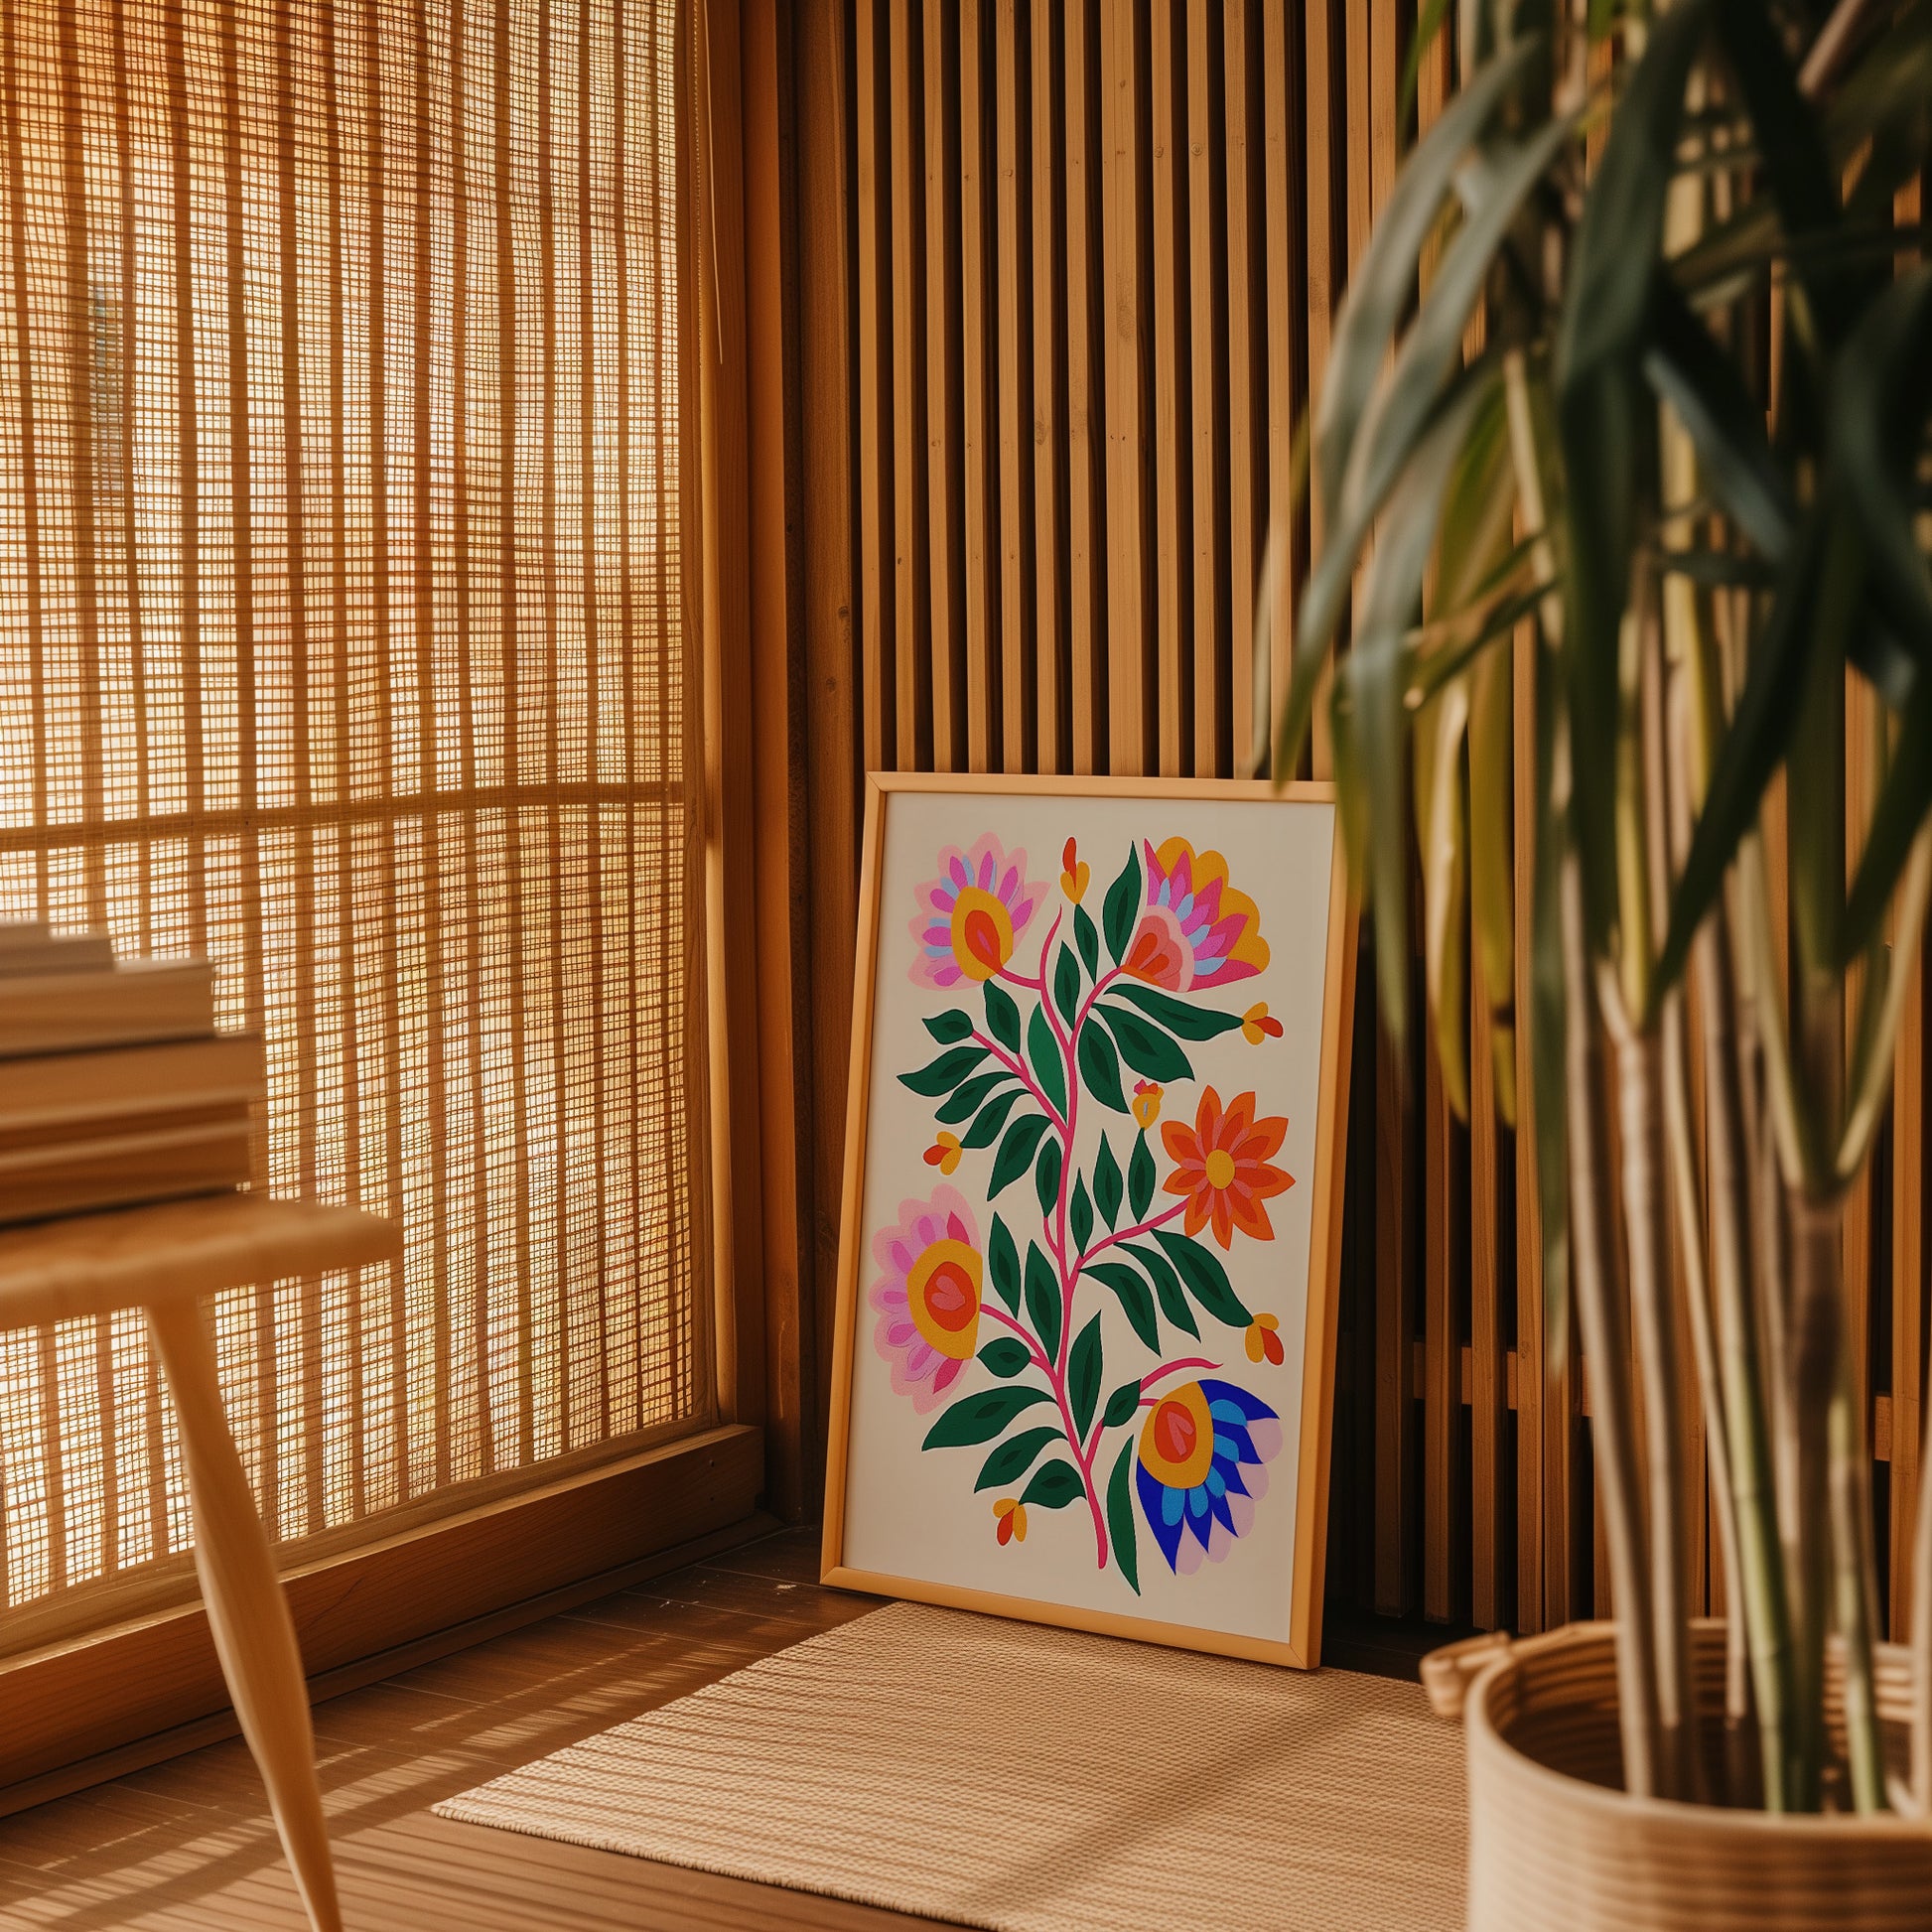 A framed floral artwork leaning against a wall next to a plant in a sunny room with blinds.